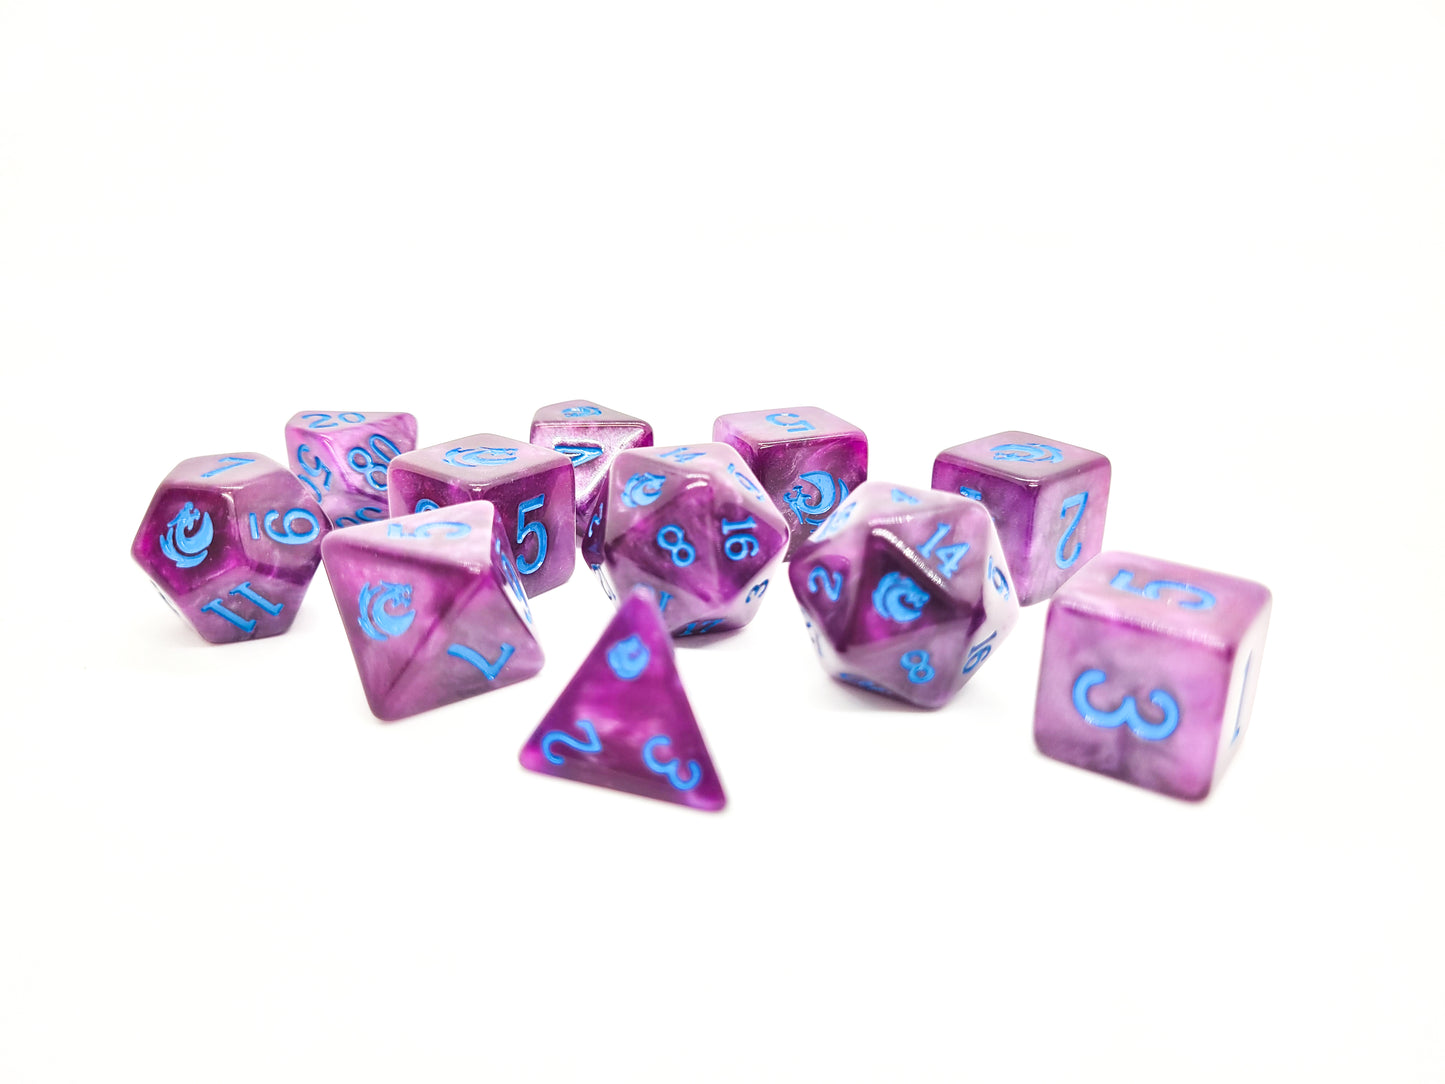 Dragon's Mana from Mystic Dragon Games - 11-piece dice set